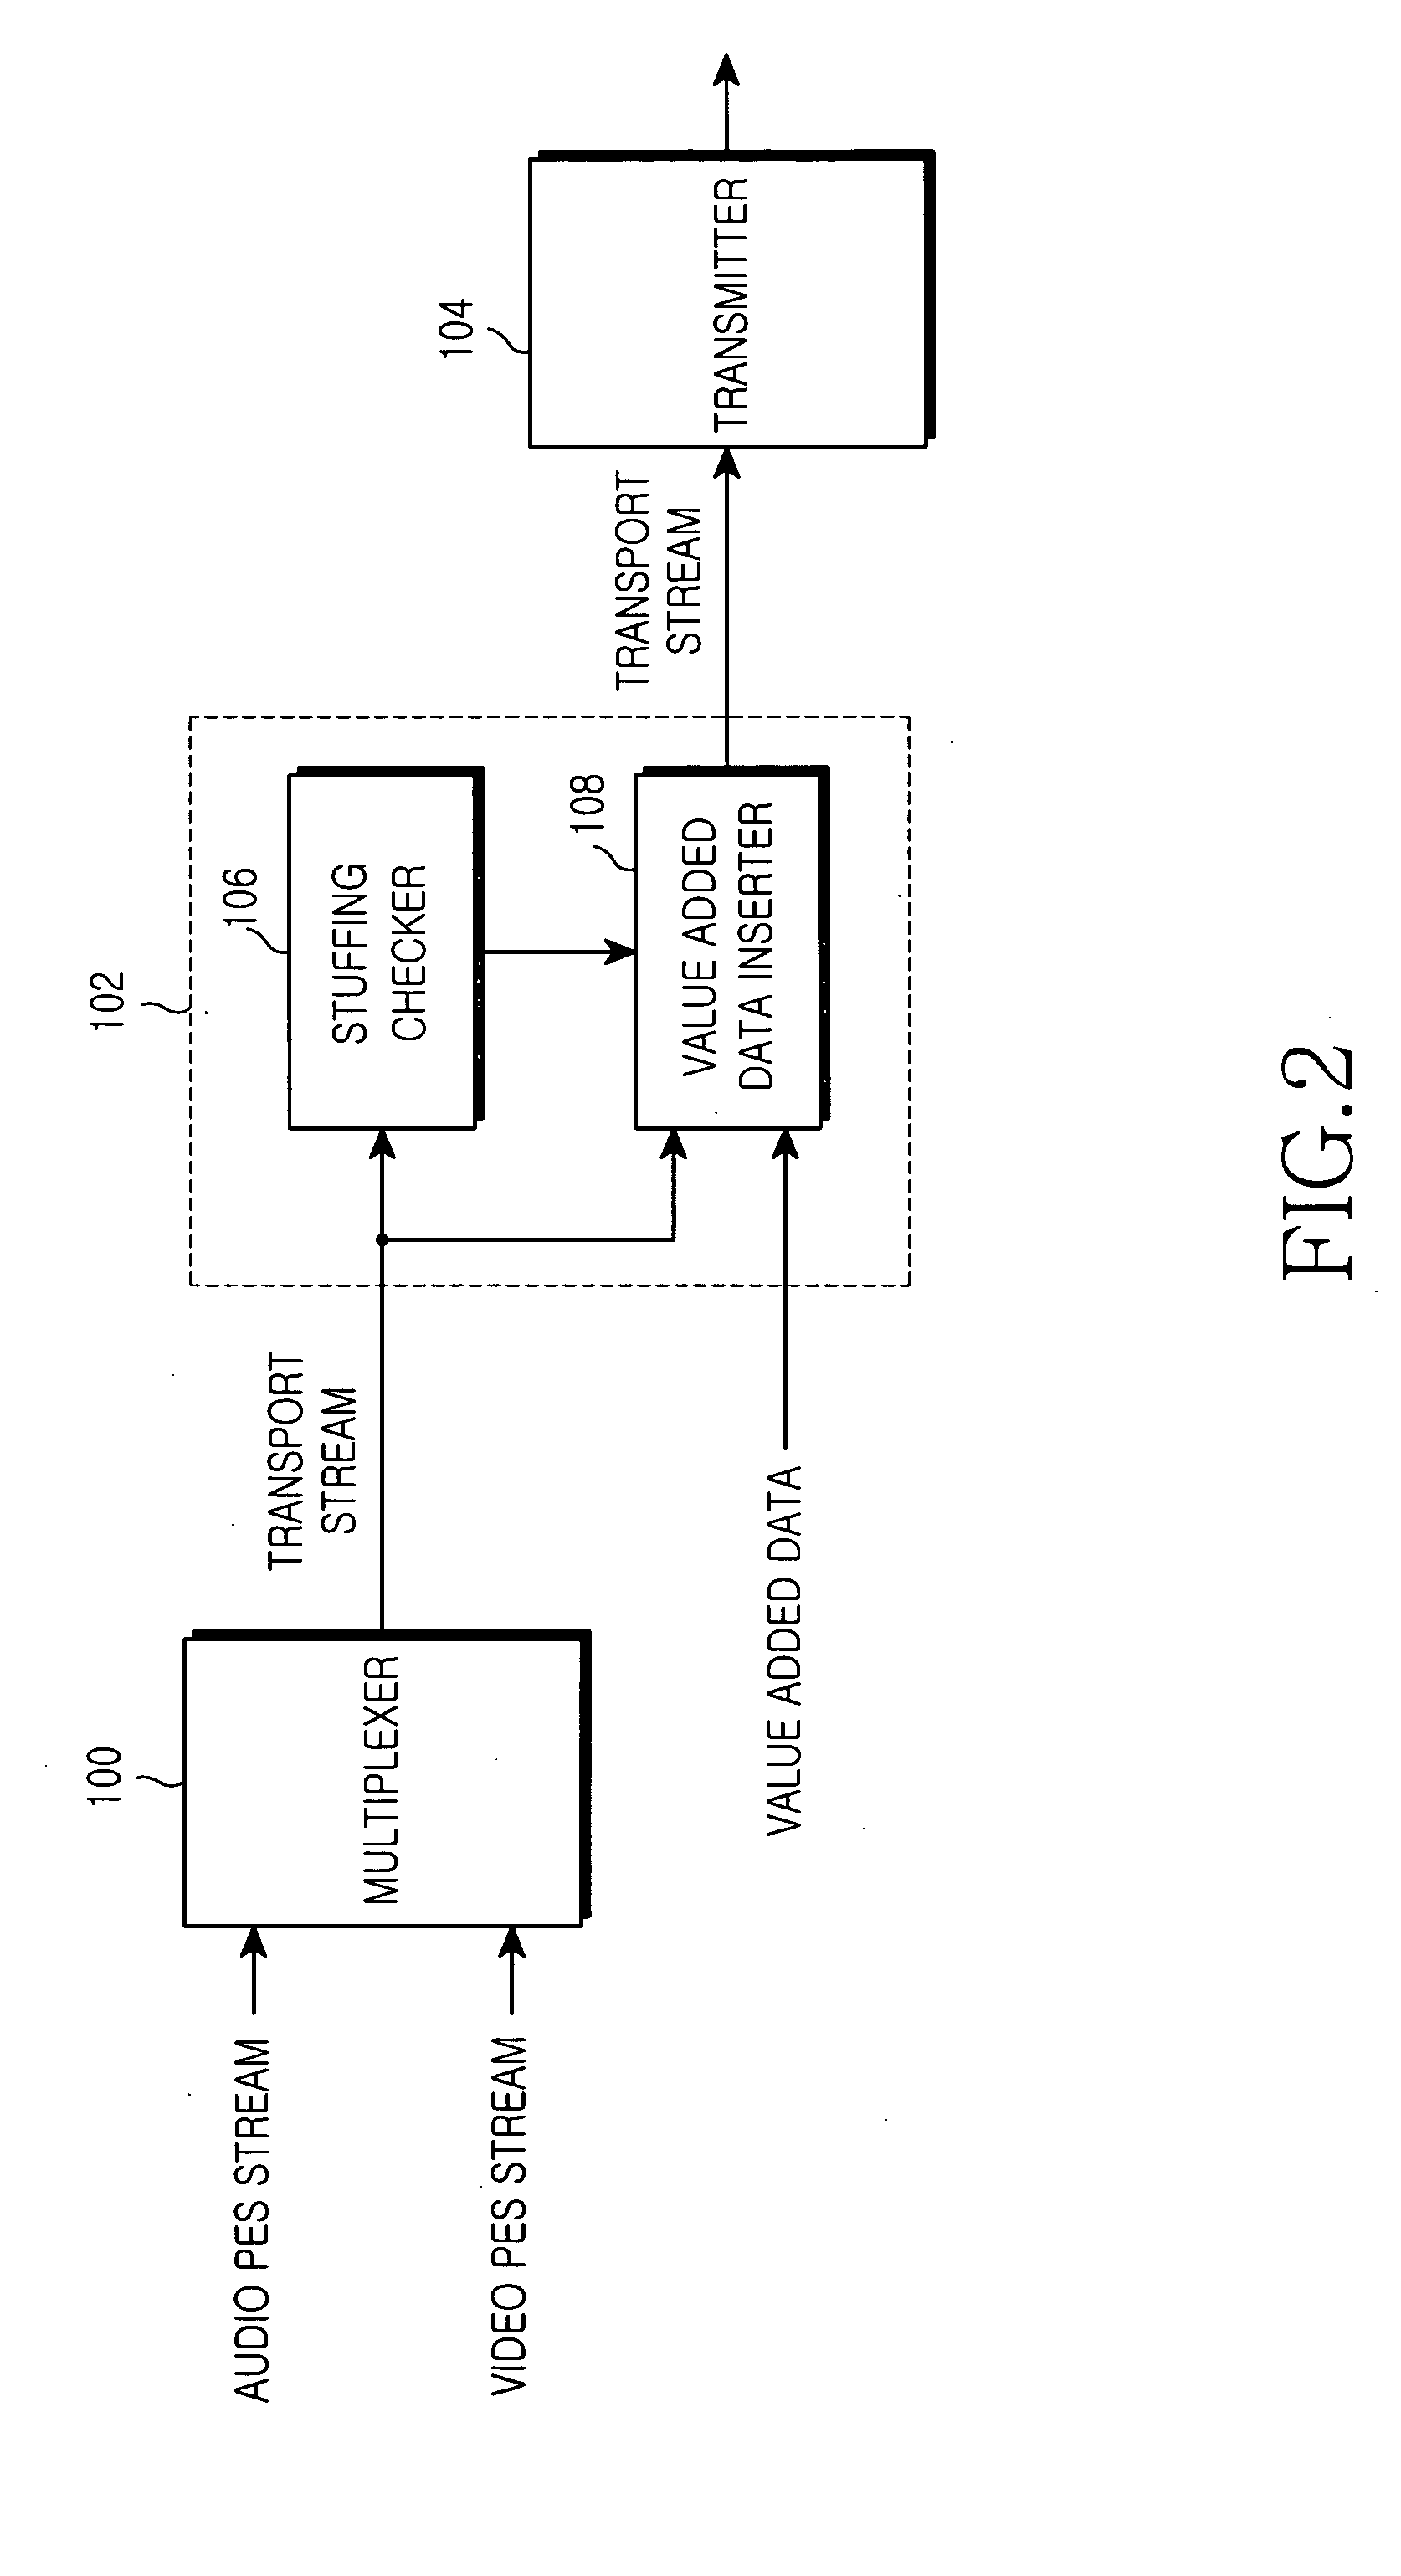 Apparatus and method for inserting and extracting value added data in transport stream-based MPEG-2 system